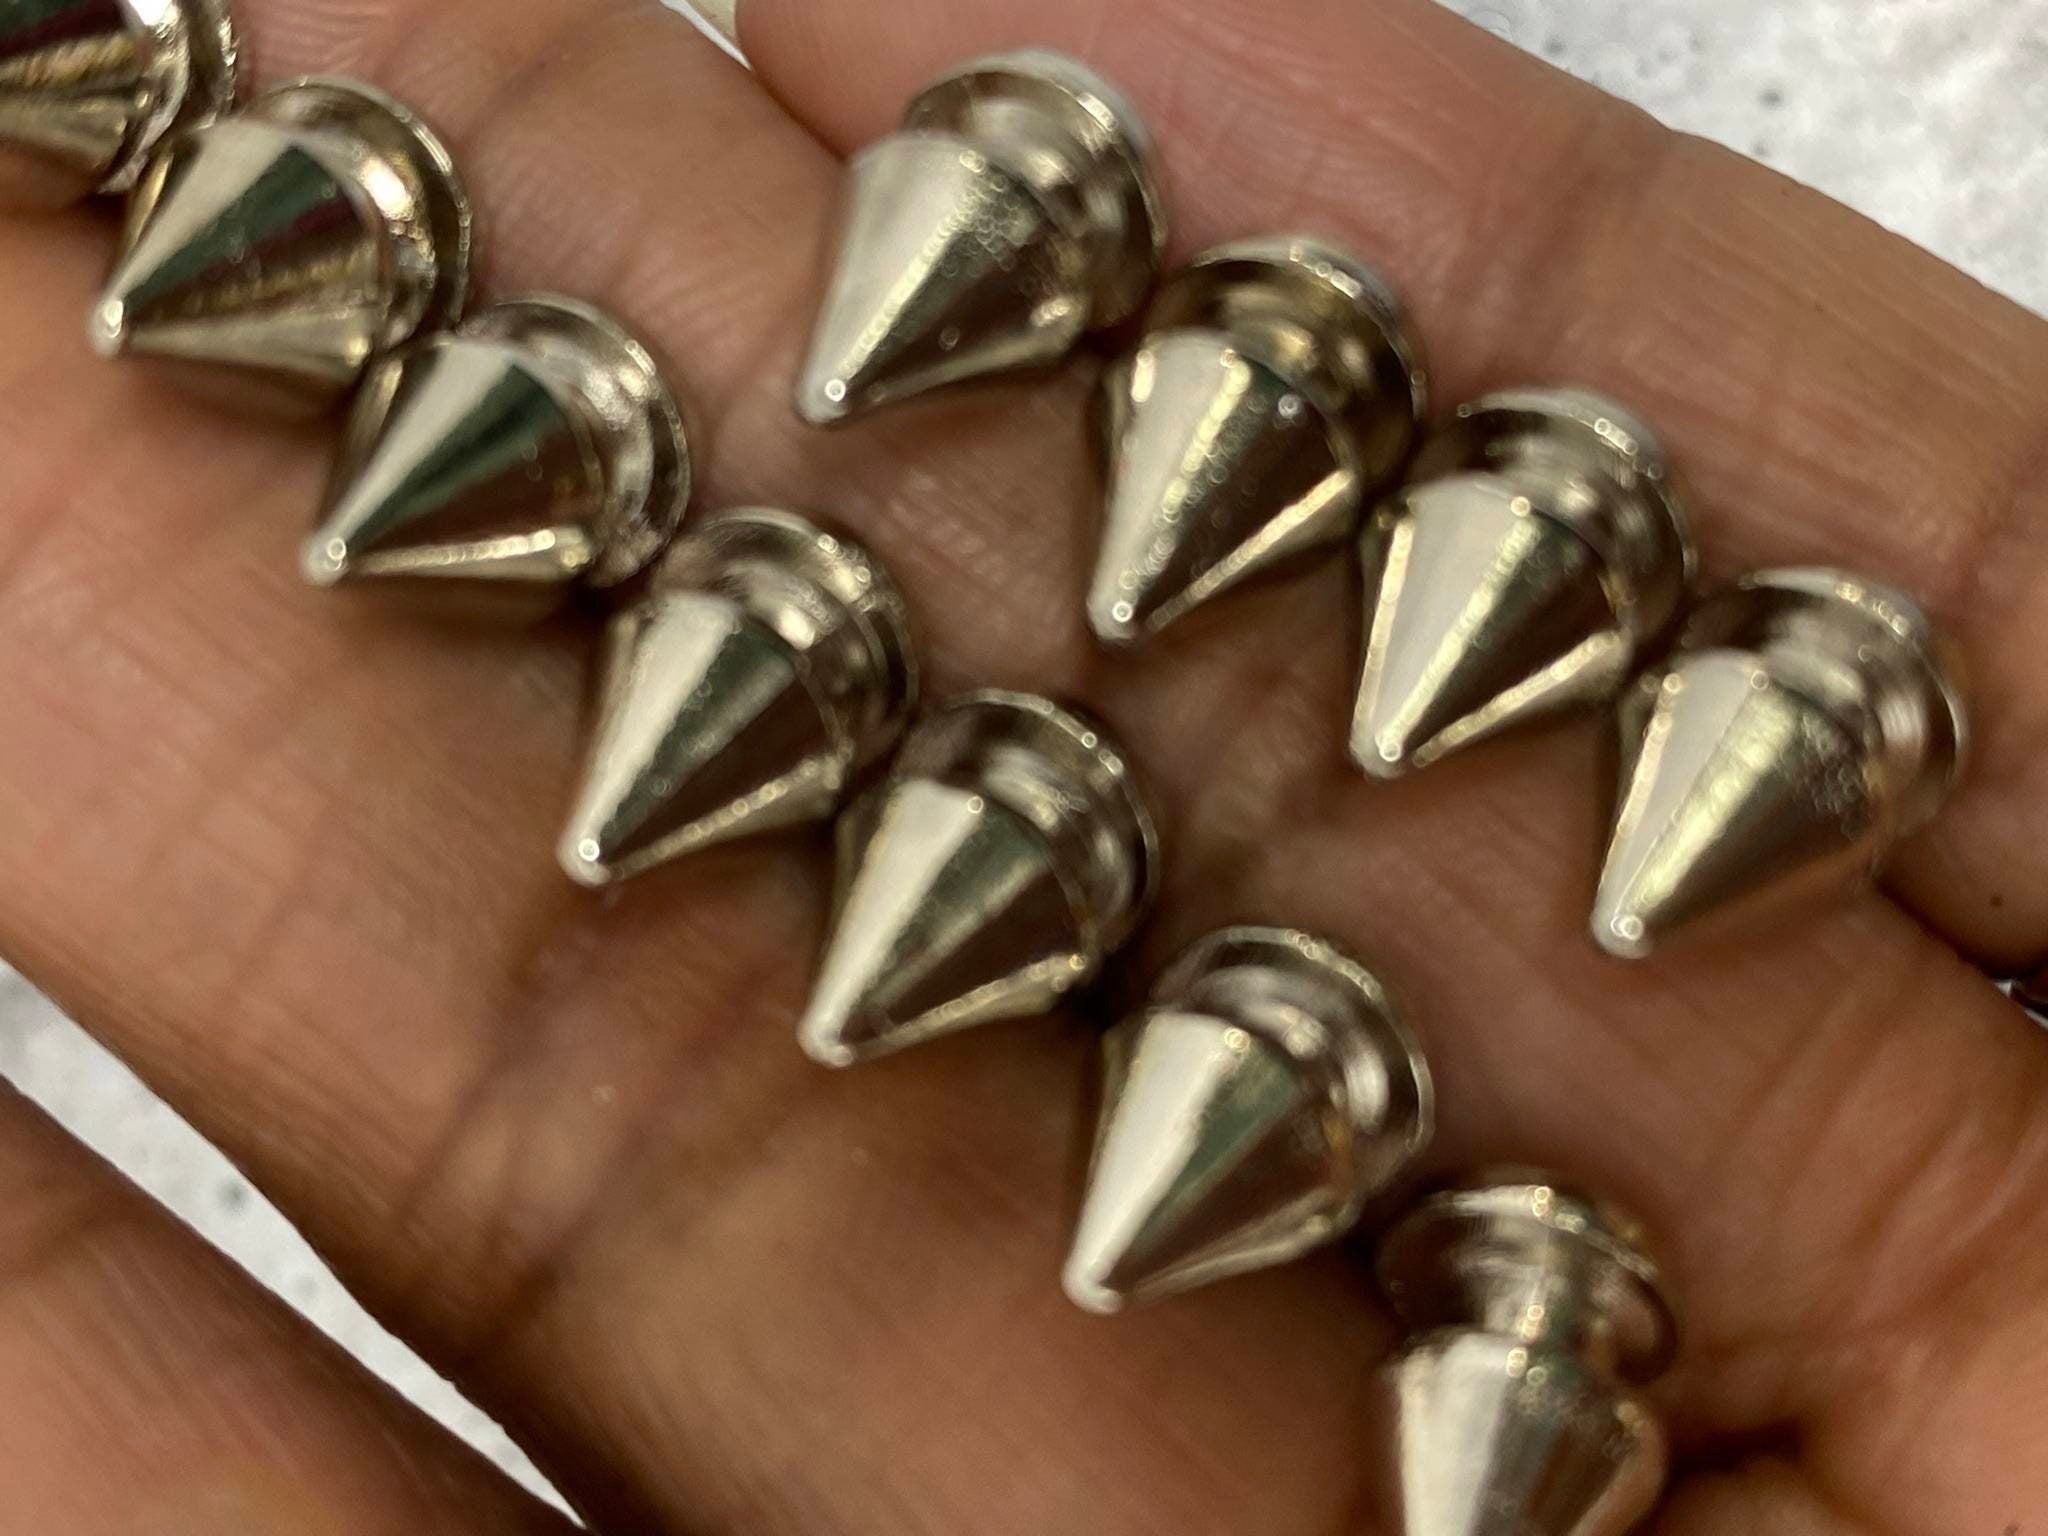 New,"Silver" Spikes, 12mm, 100-pcs, Spikes w/Screws, Small Cone Spikes & Studs, Metallic Screw-Back for DIY Punk, Leather, Bags, and Apparel